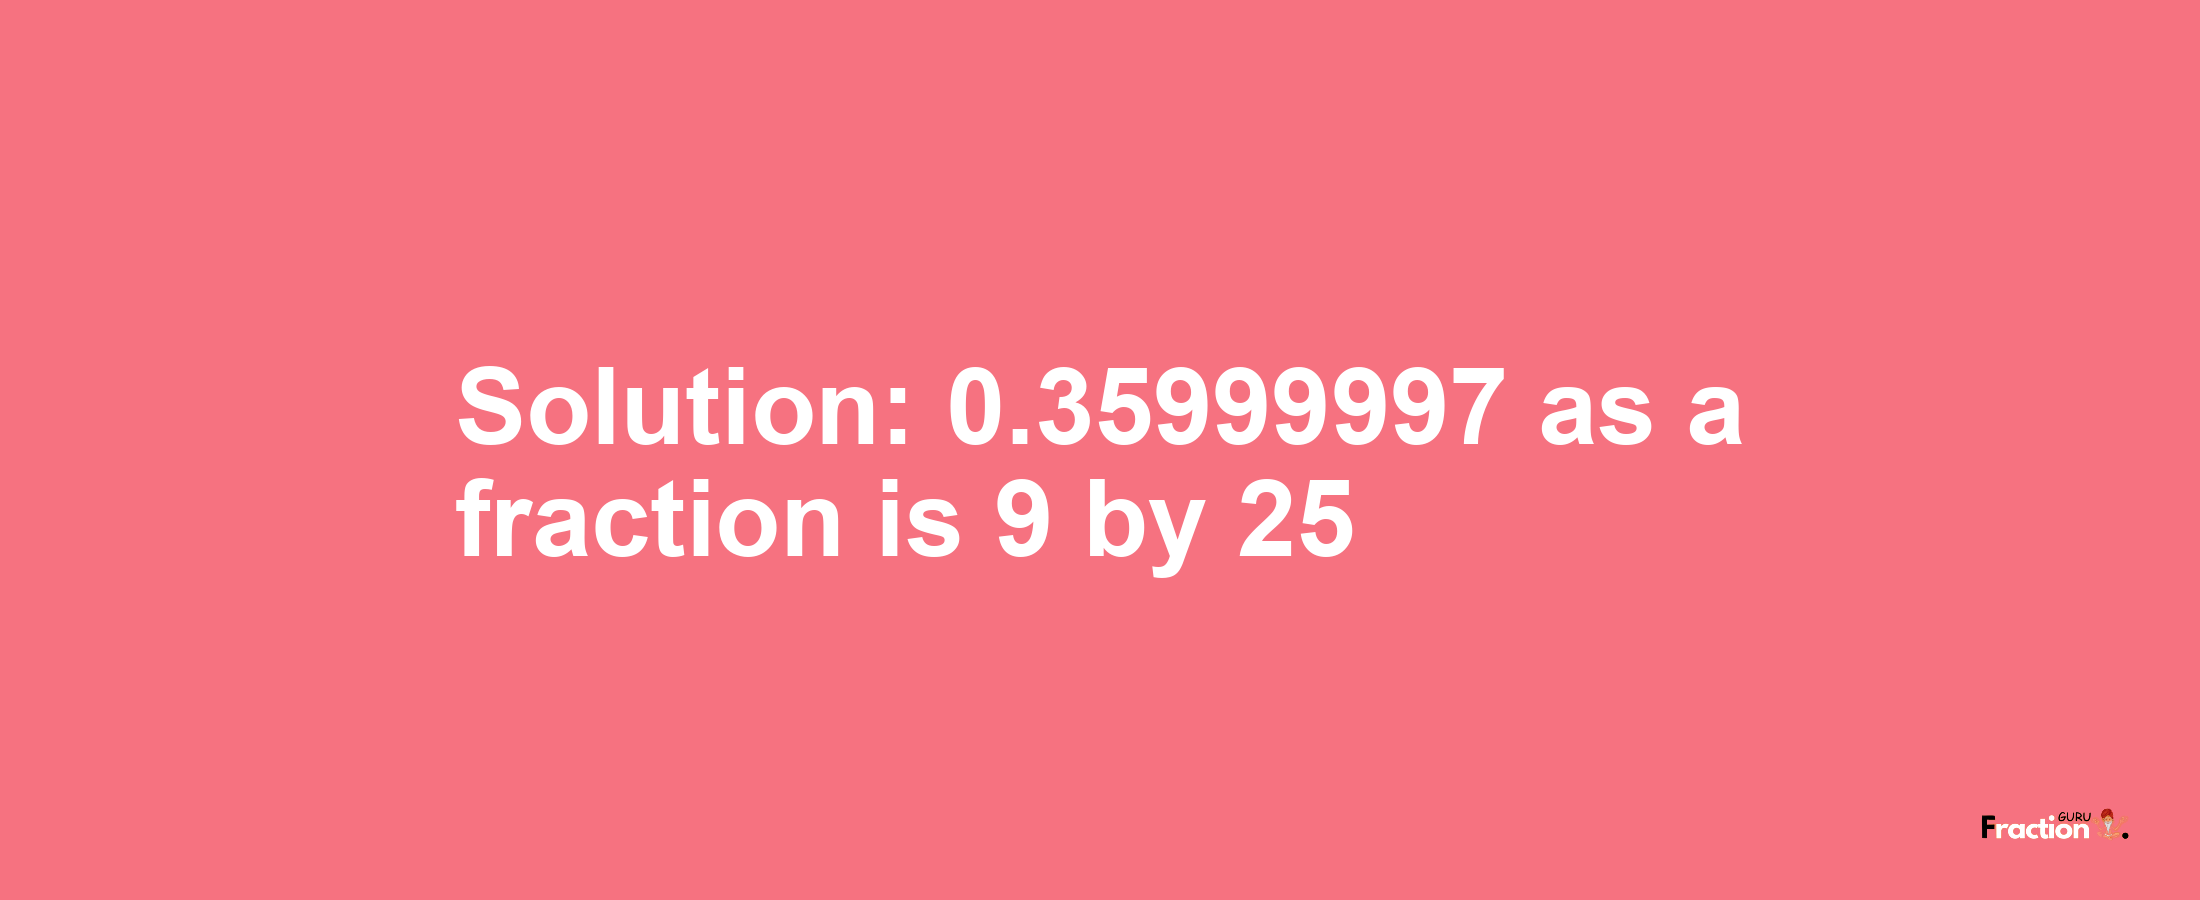 Solution:0.35999997 as a fraction is 9/25